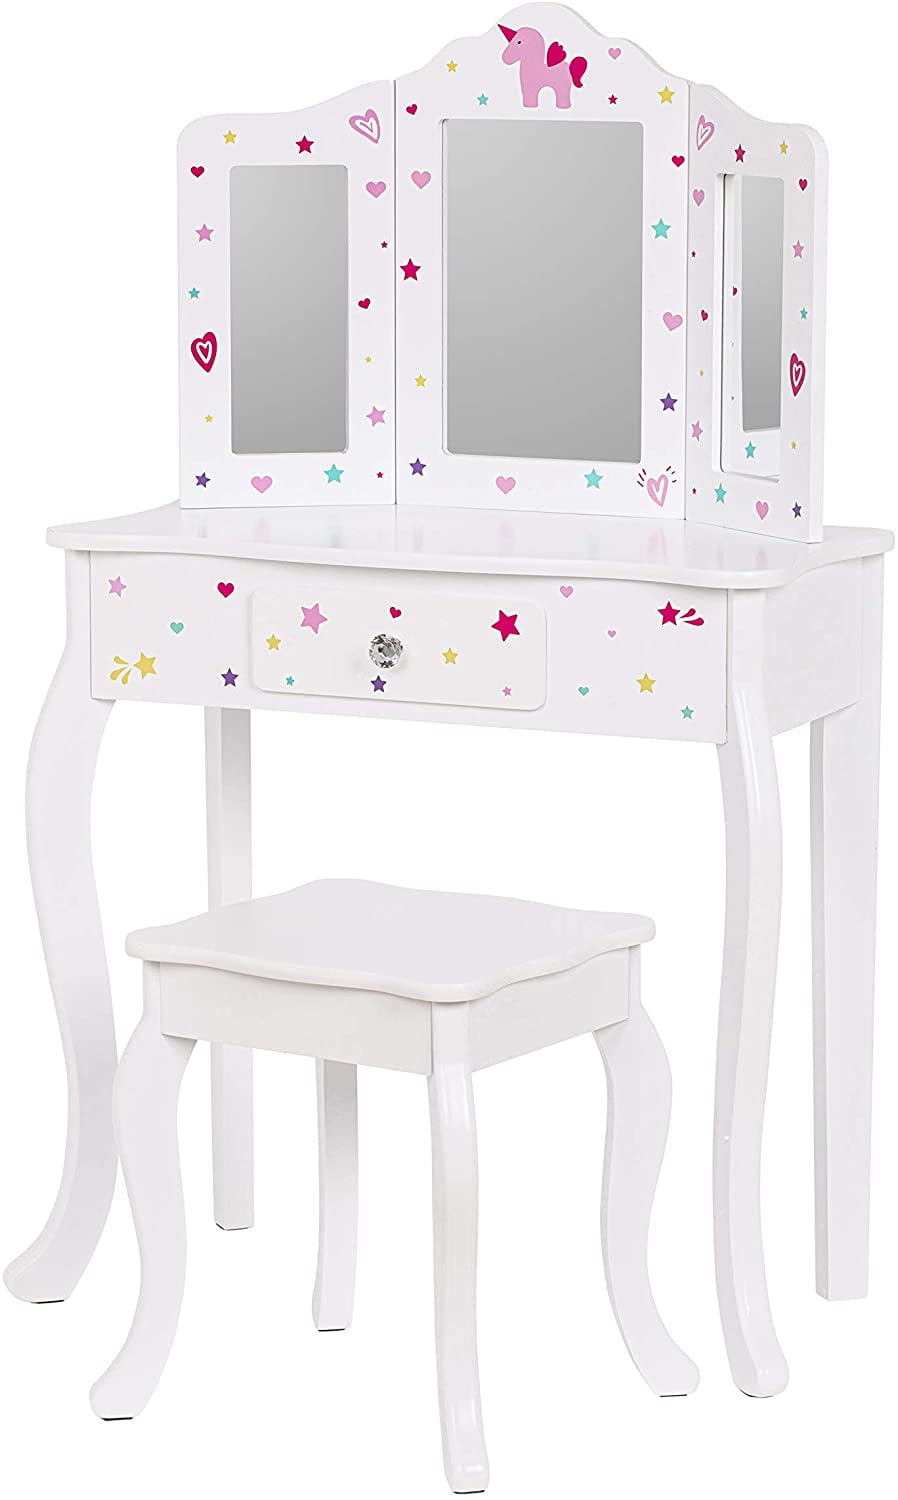 Kids Vanity Table And Chair Set, Deluxe 2 Piece Vanity Set With Mirror